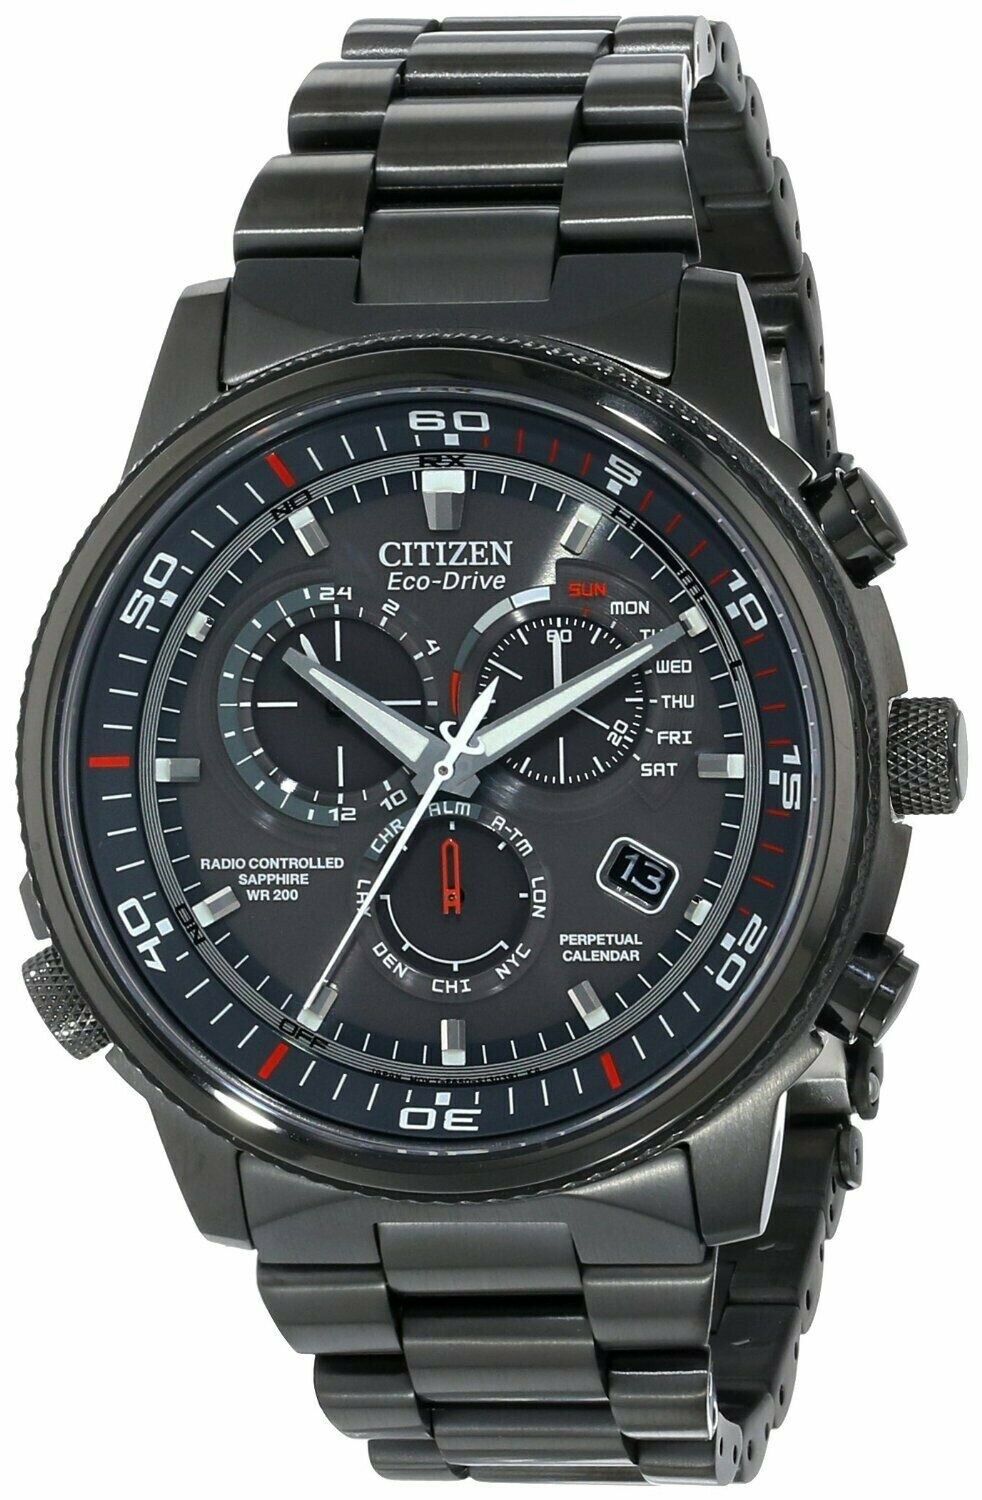 Citizen Eco-Drive Nighthawk A-T (AT4117-56H) Market Price | WatchCharts